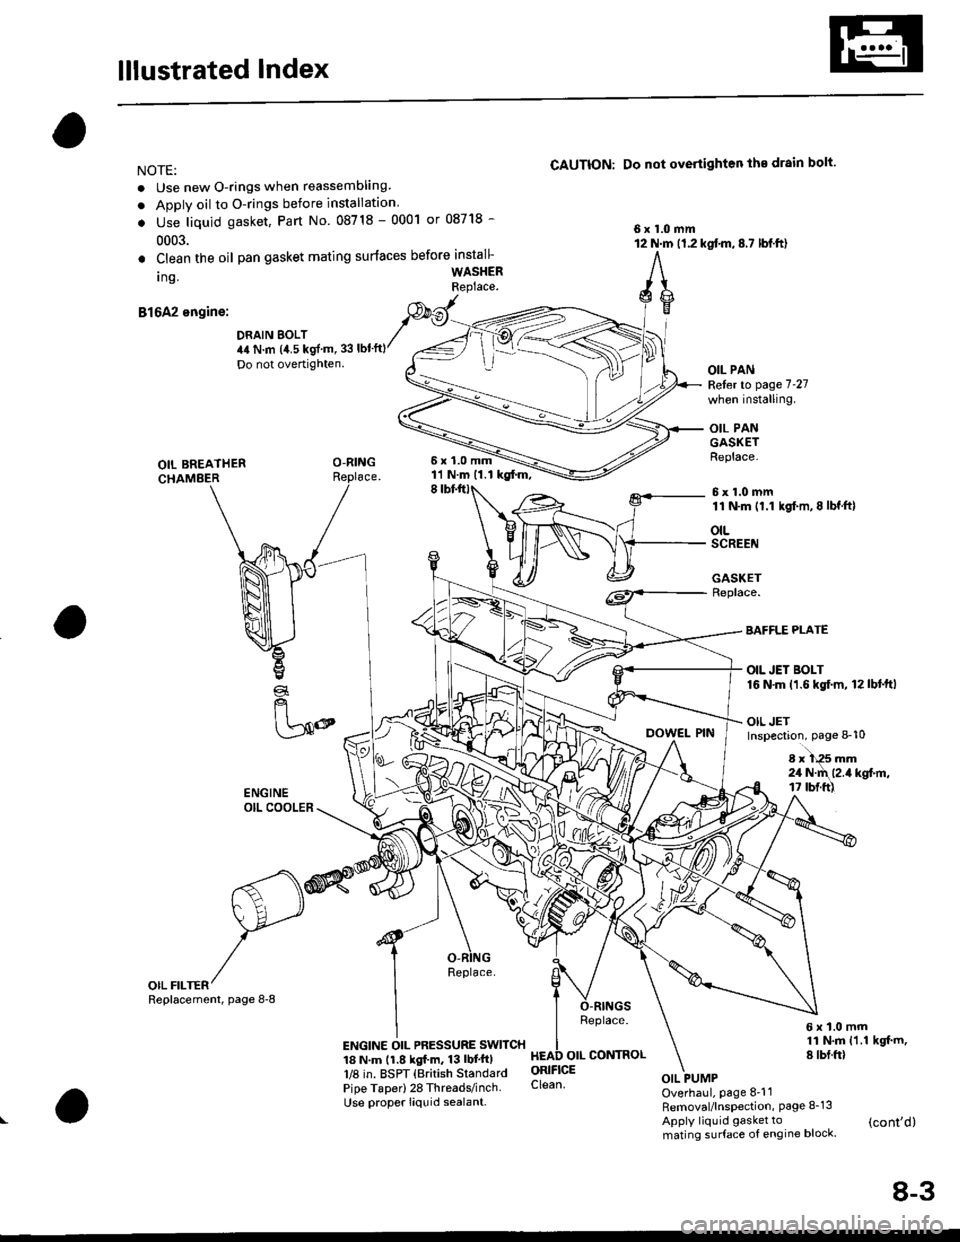 HONDA CIVIC 1996 6.G Workshop Manual lllustrated Index
NOTE:
. Use new O-rings when reassembling
. Apply oil to O-rings before installation
. Use liquid gasket, Part No 08718 - 0001 or 08718 -
0003.
CAUTION: Do not overiighten the drain 